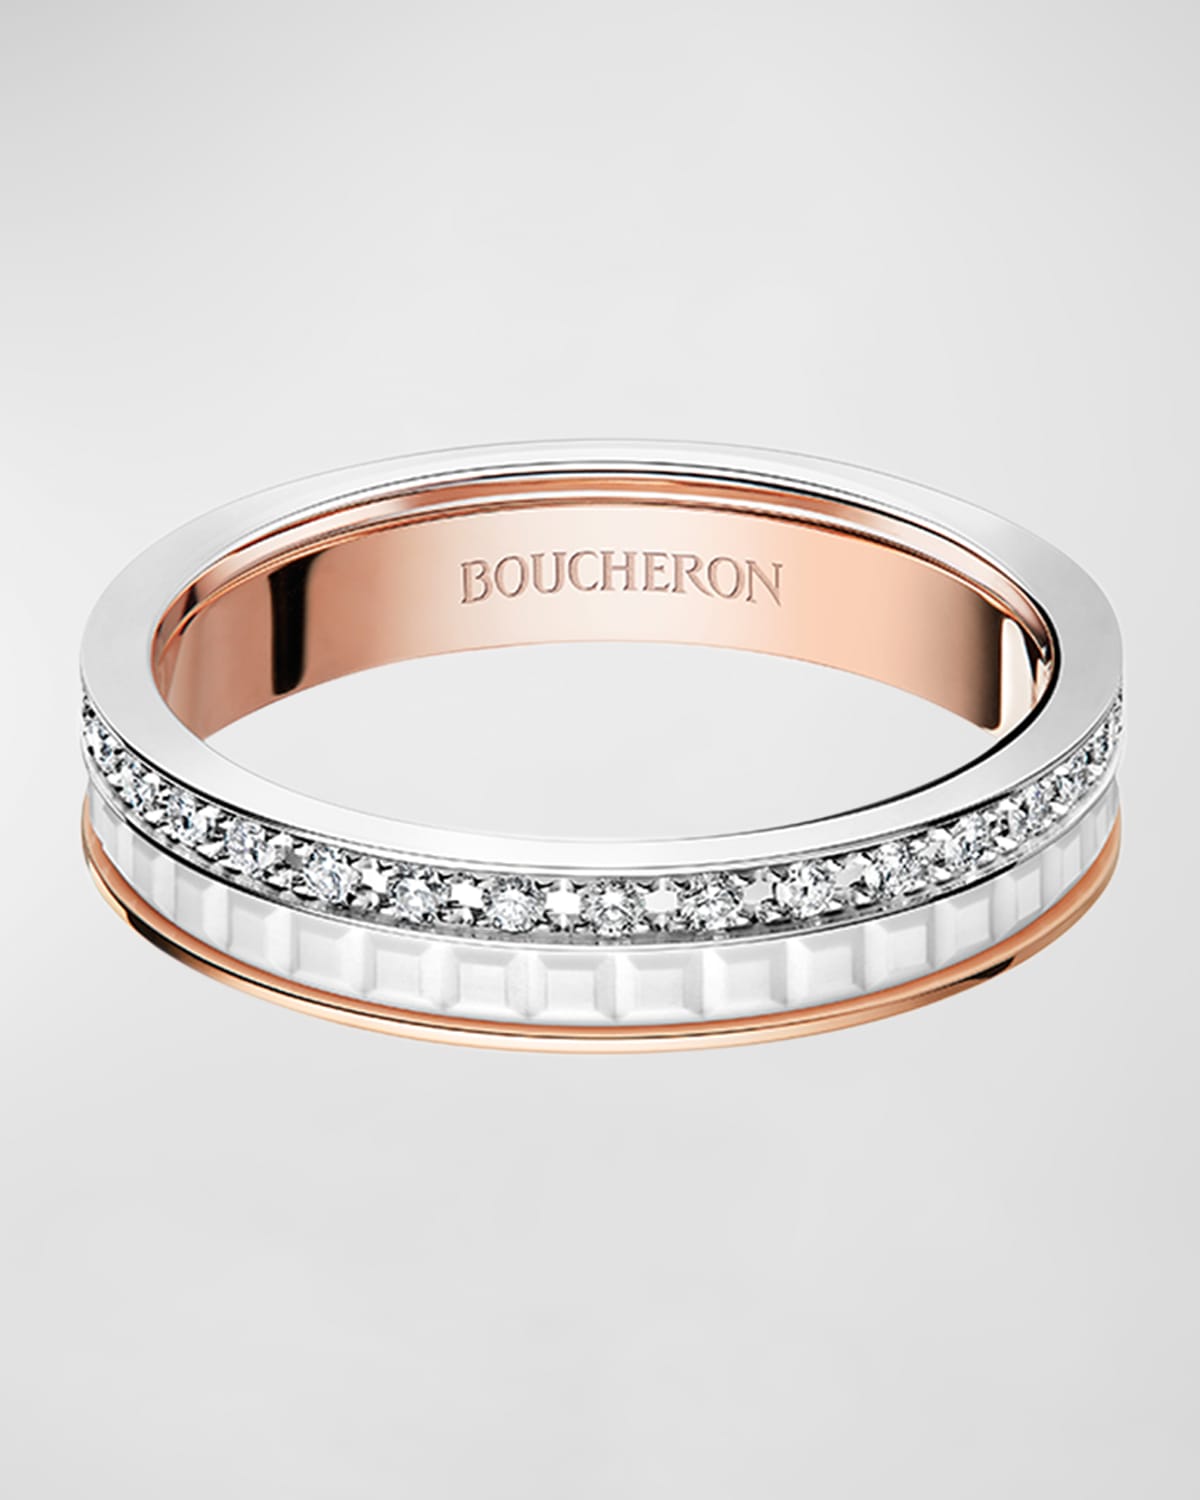 Boucheron Quatre White Edition Ring in White Gold and Pink Gold, Size 53